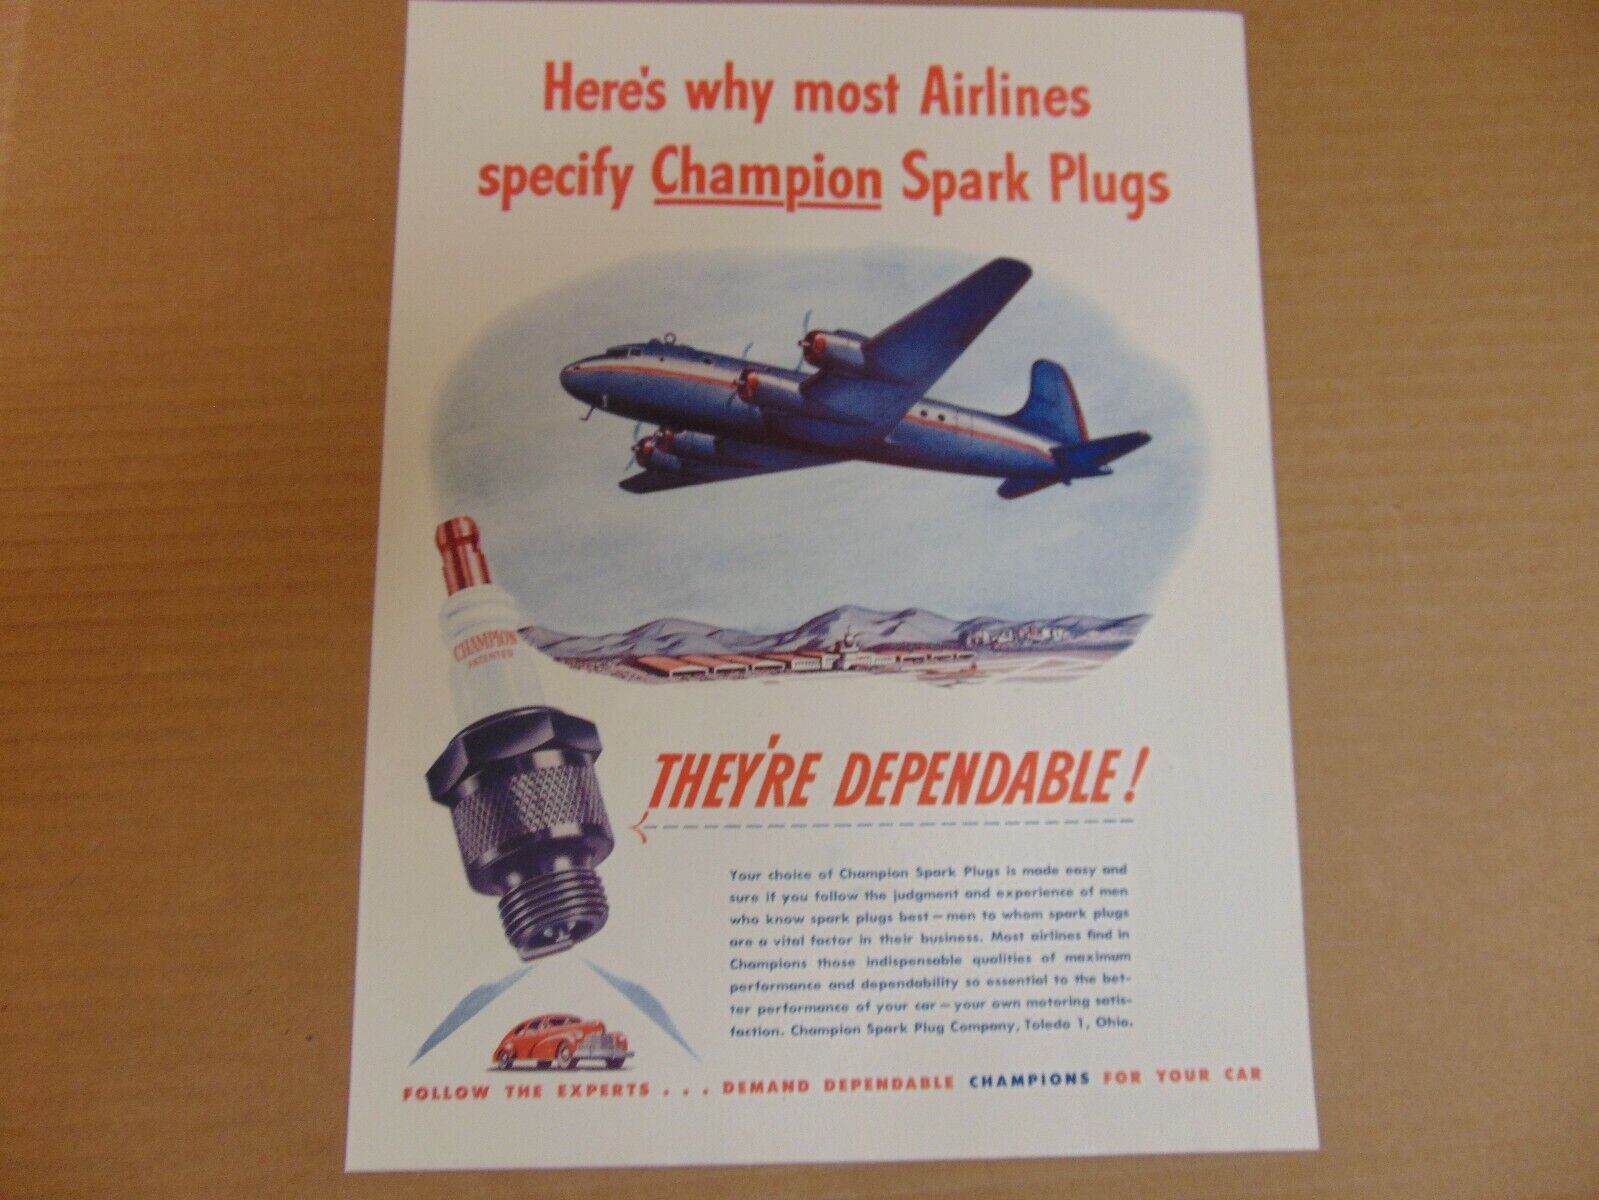 1946 CHAMPION SPARK PLUGS AIRLINES USE FOR DEPENDABILITY vintage art print ad 